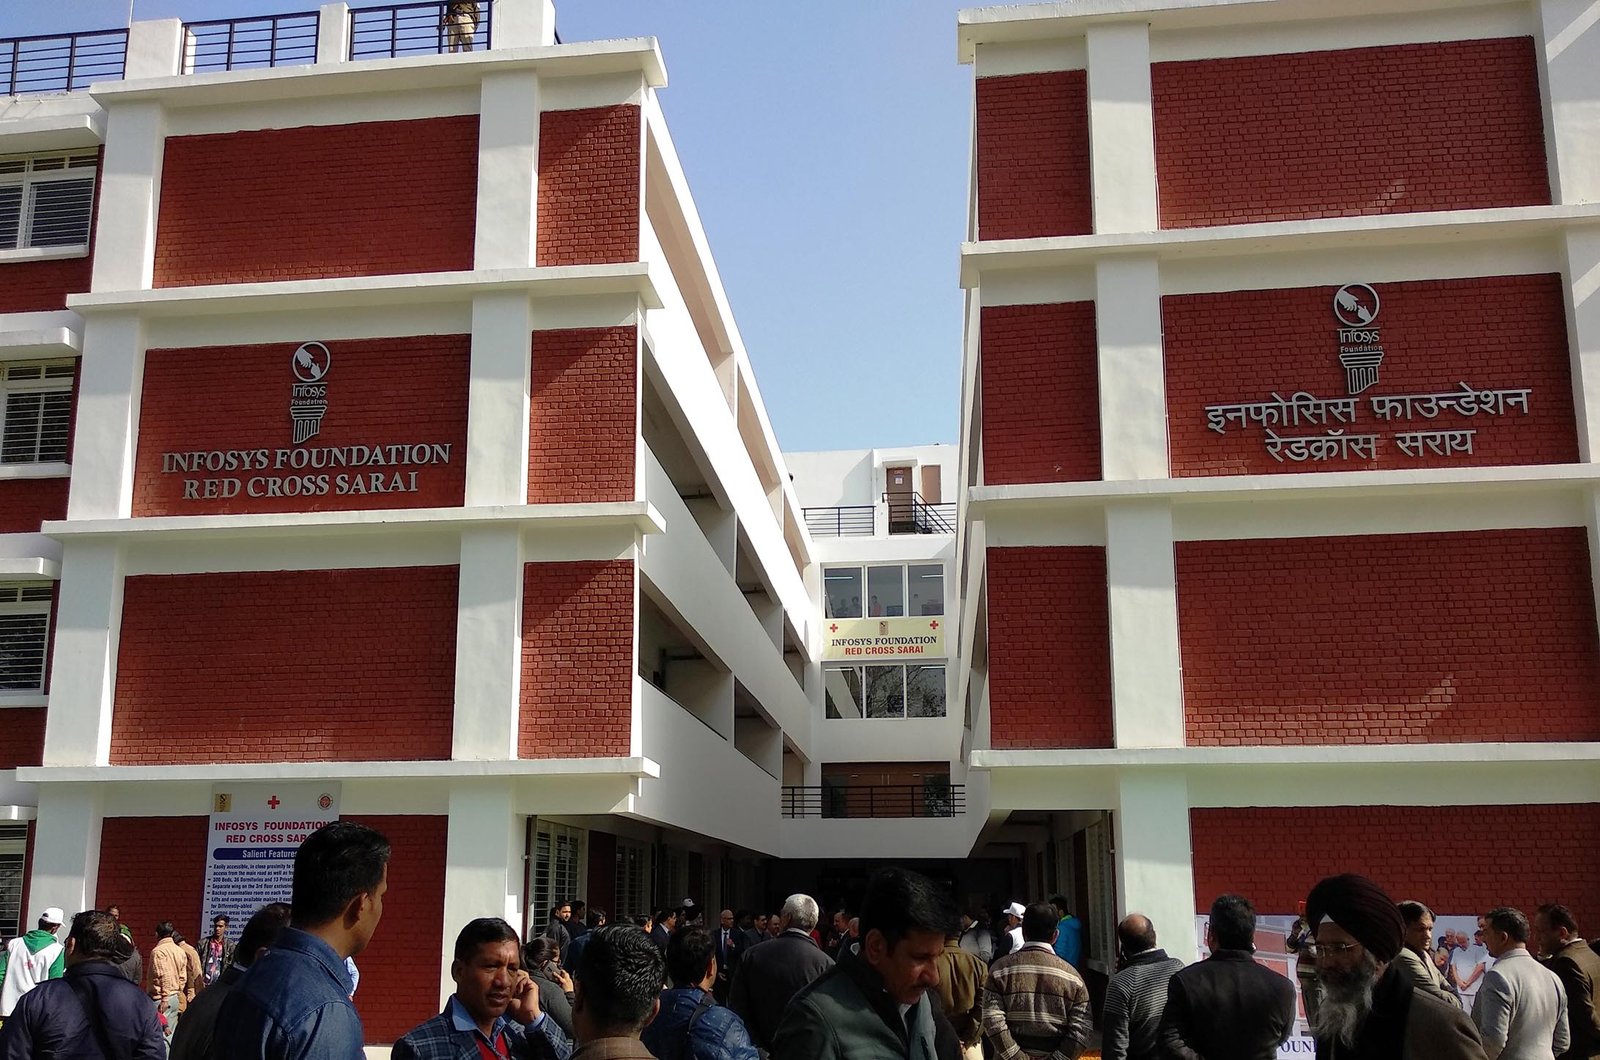 Swanky, But Affordable Infosys Foundation Red Cross Sarai Has 300 Dormitory, Private Room Beds, Lifeinchd